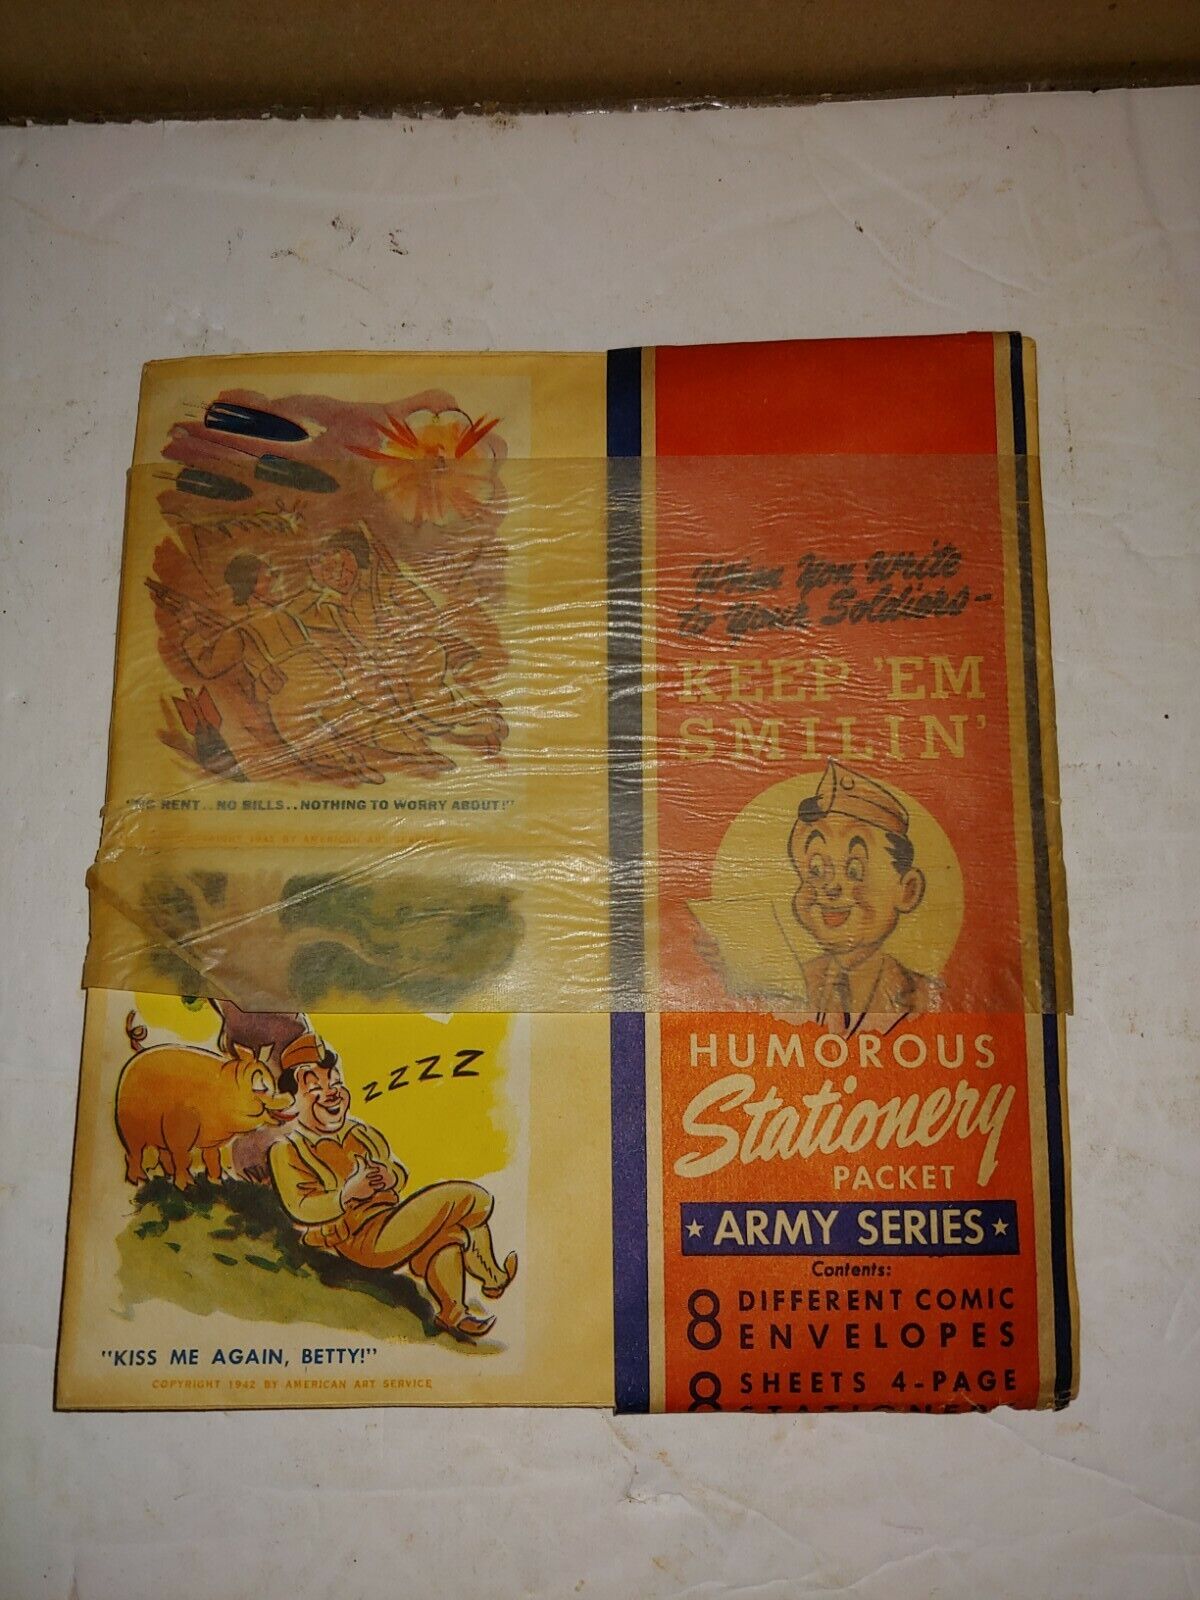 Vintage 1940's WWII Army Series Humorous Stationery Packet,Letters,Banded,Unused